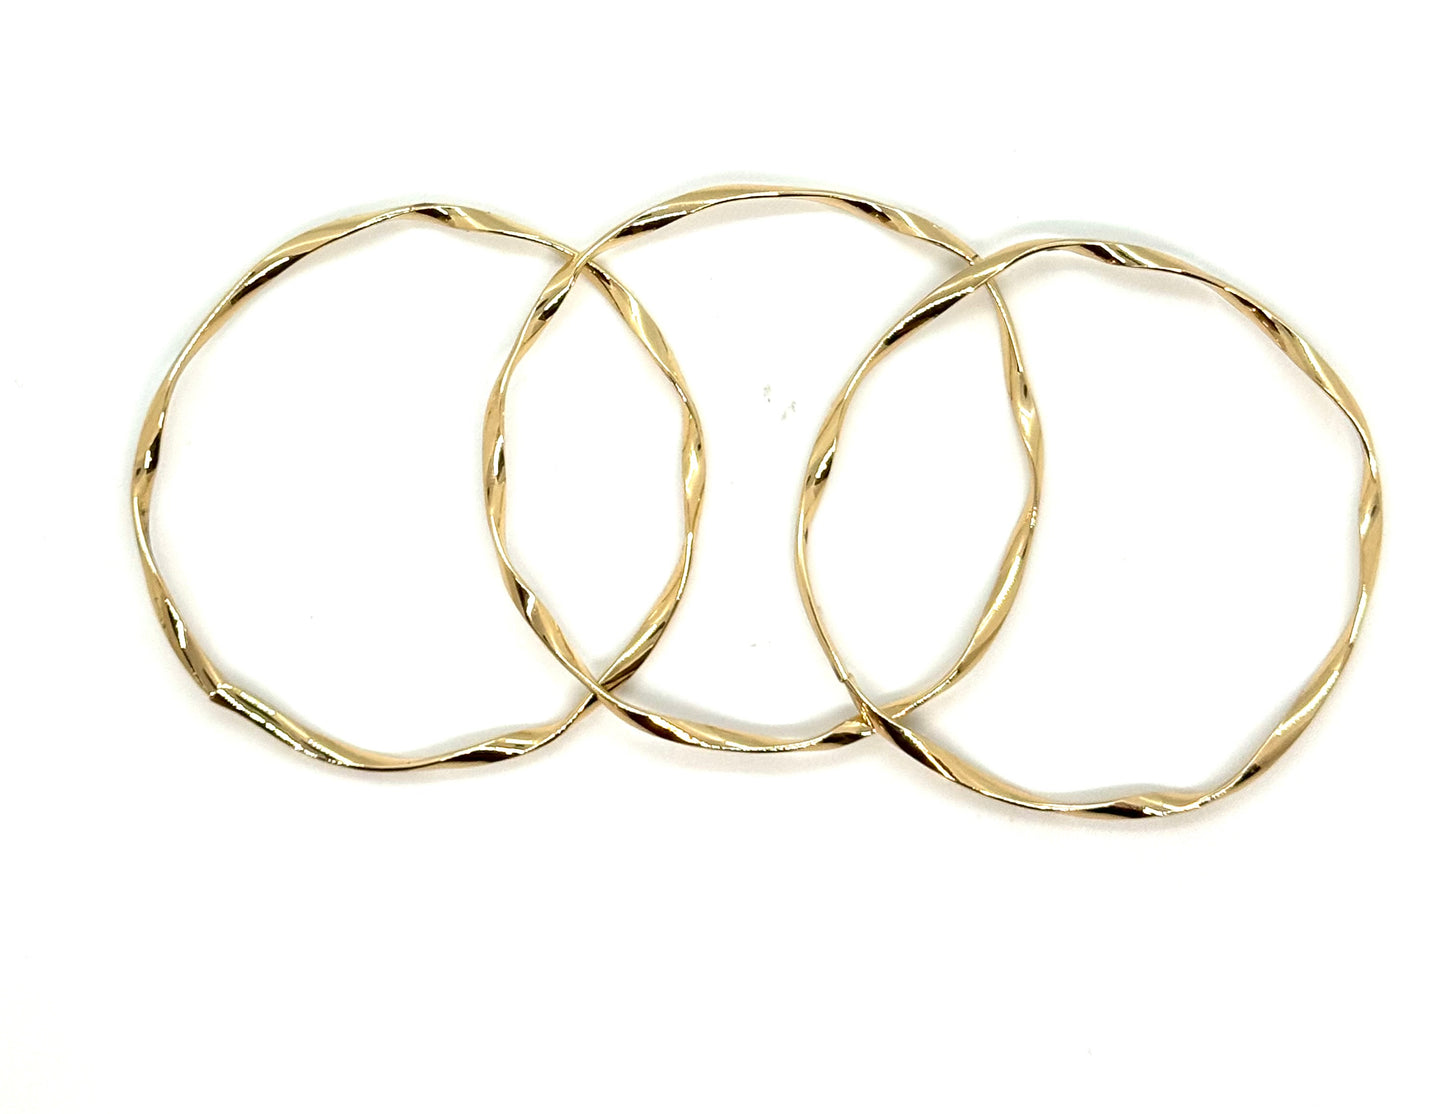 Set of 3 Gold Twisted Bangles